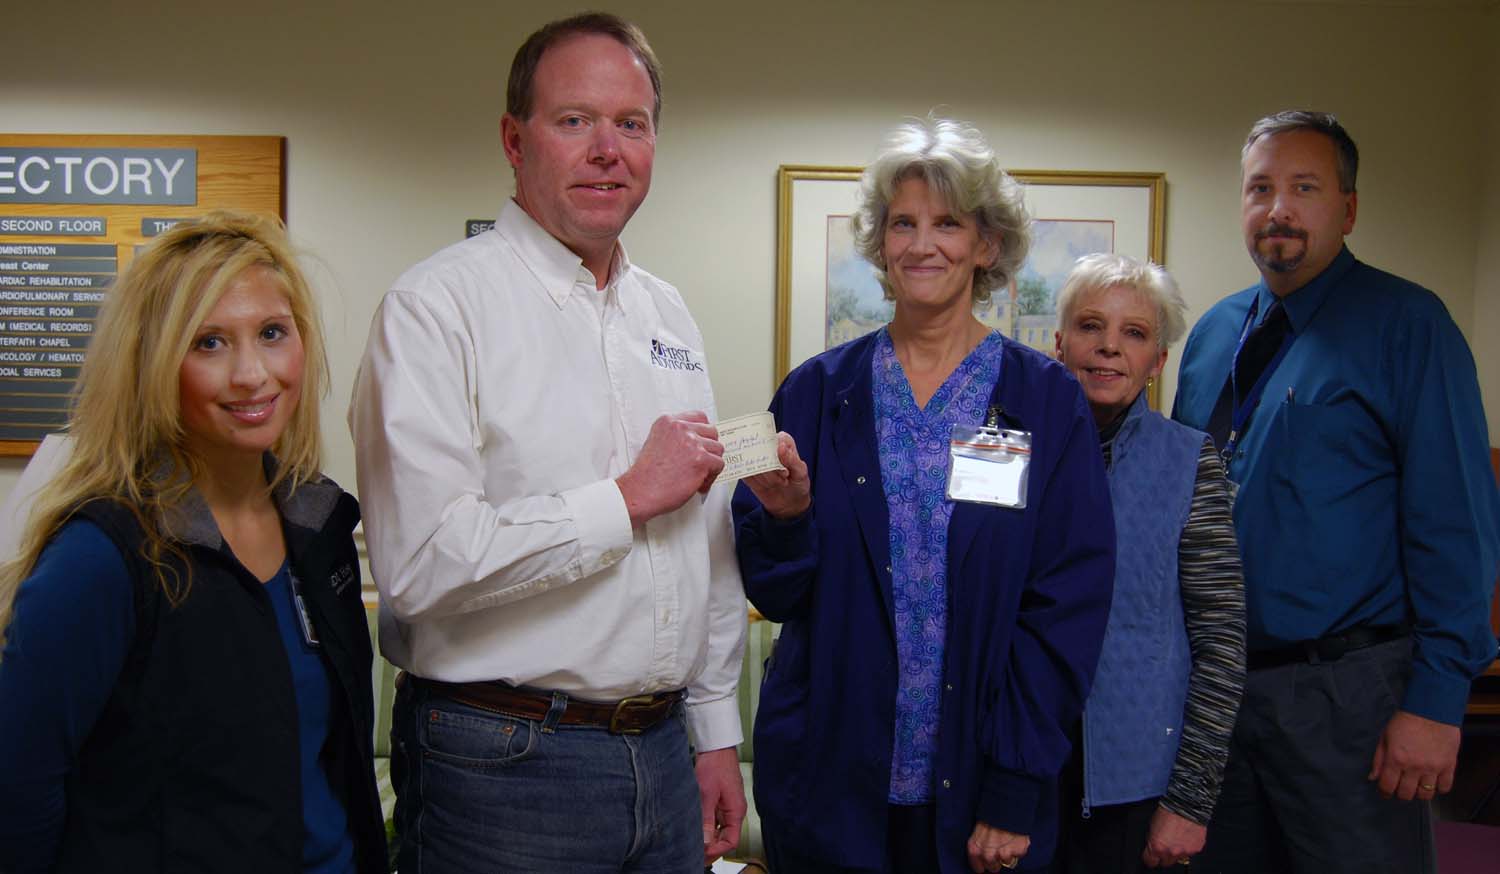 Patients at MDI Hospital’s Island Infusion Center benefit from Rotary Club gift